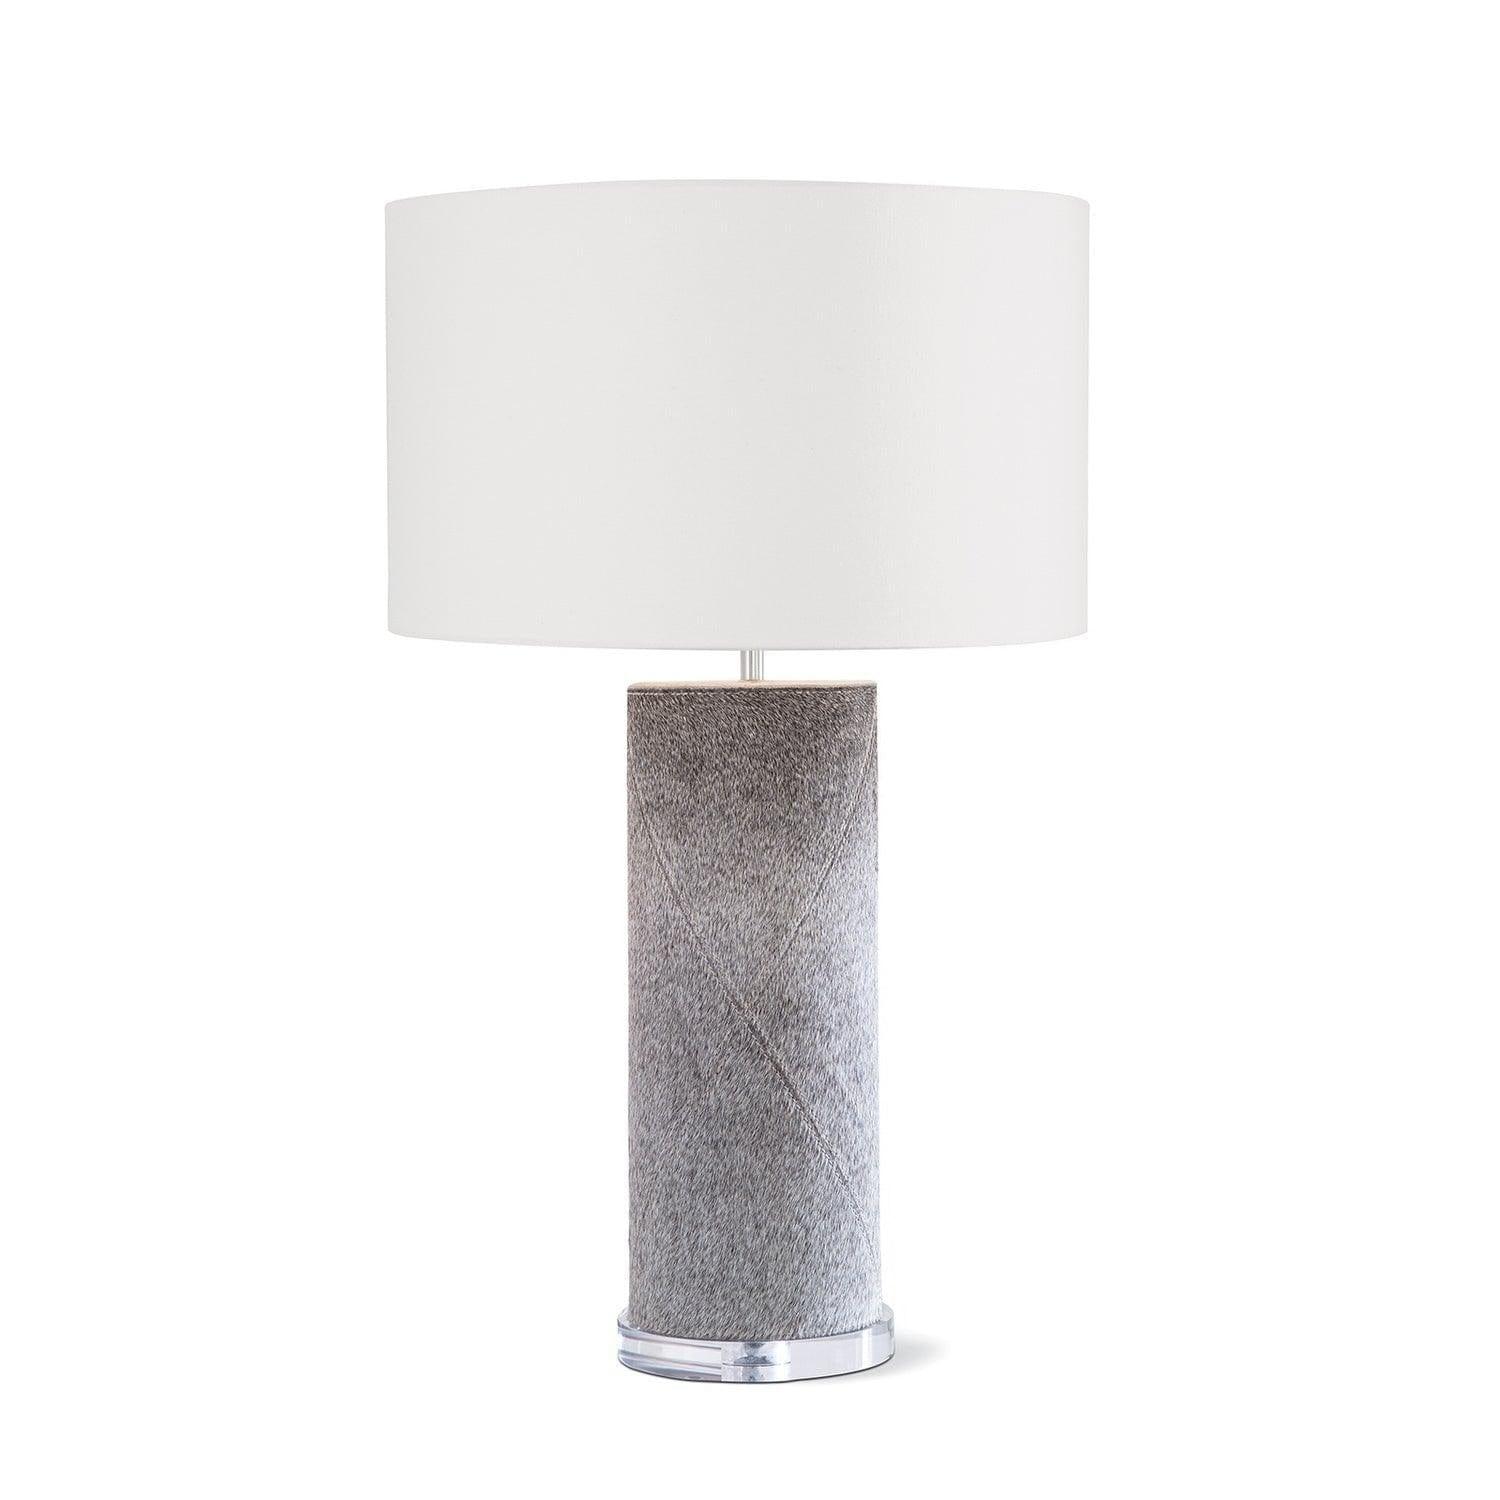 Regina Andrew - Andres Column Table Lamp - 13-1565GRY | Montreal Lighting & Hardware